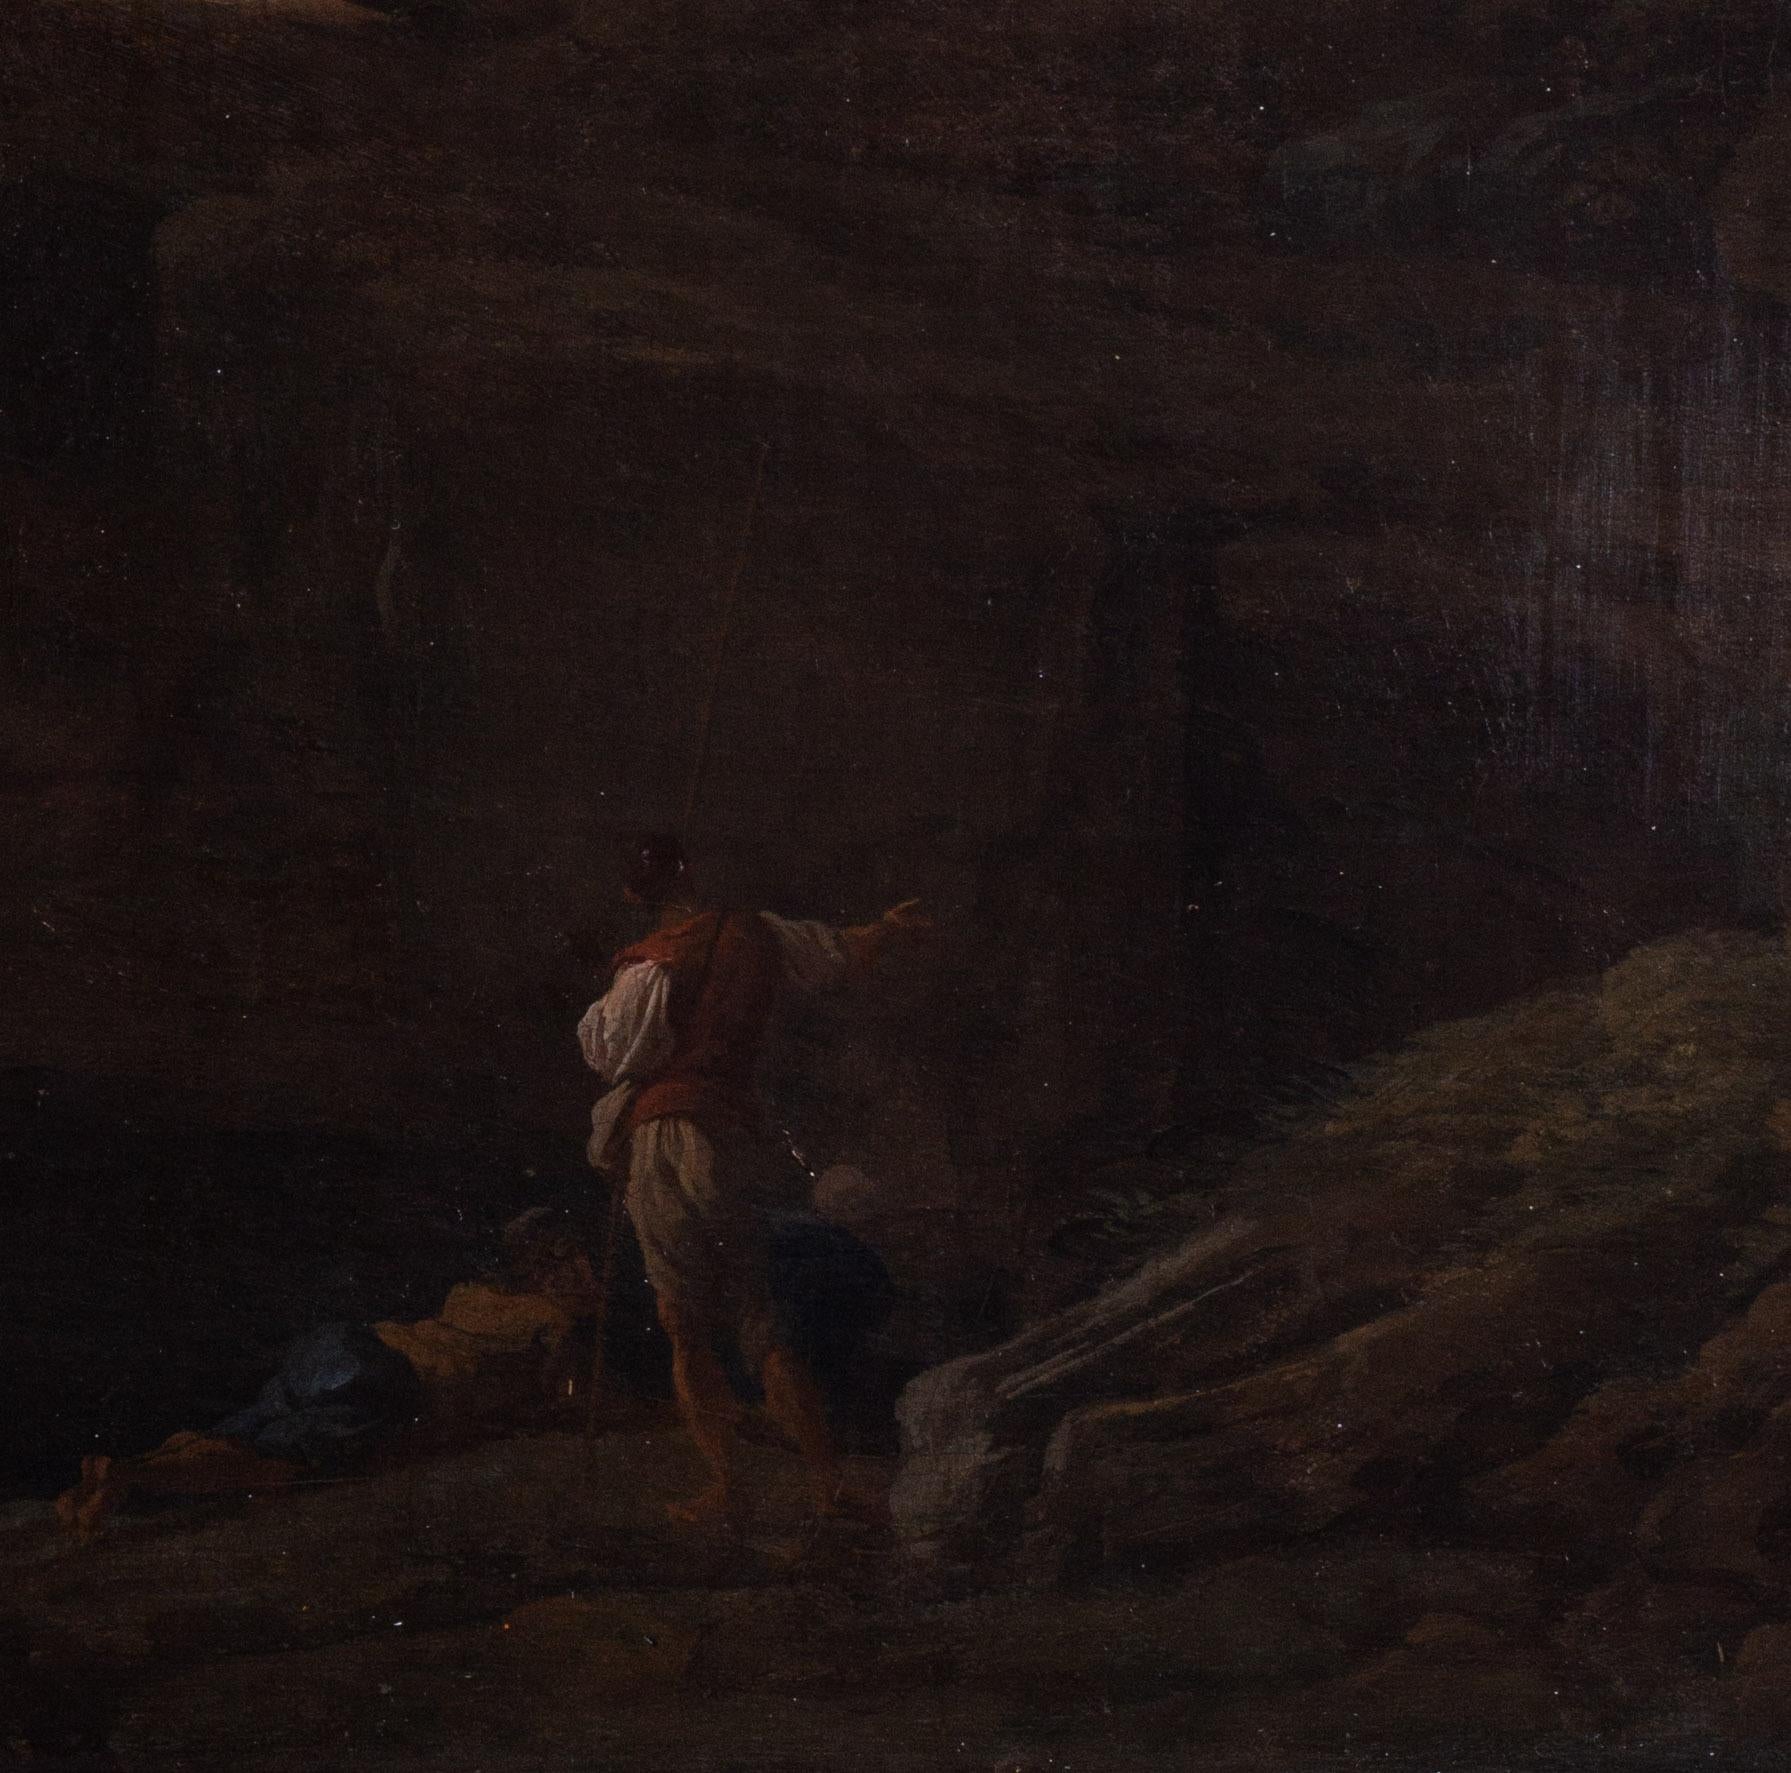 Claude-Joseph Vernet (French, 1714 – 1789)
Fisherman by a cascade in a gorge
Oil on canvas
22.1/4 x 25.1/2 in. (56.5 x 64.7 cm.)
Provenance: 
The estate of the late Betty, Lady Grantchester
Du Catalogue Collection #39
Christie's London, 3 Dec 1997,